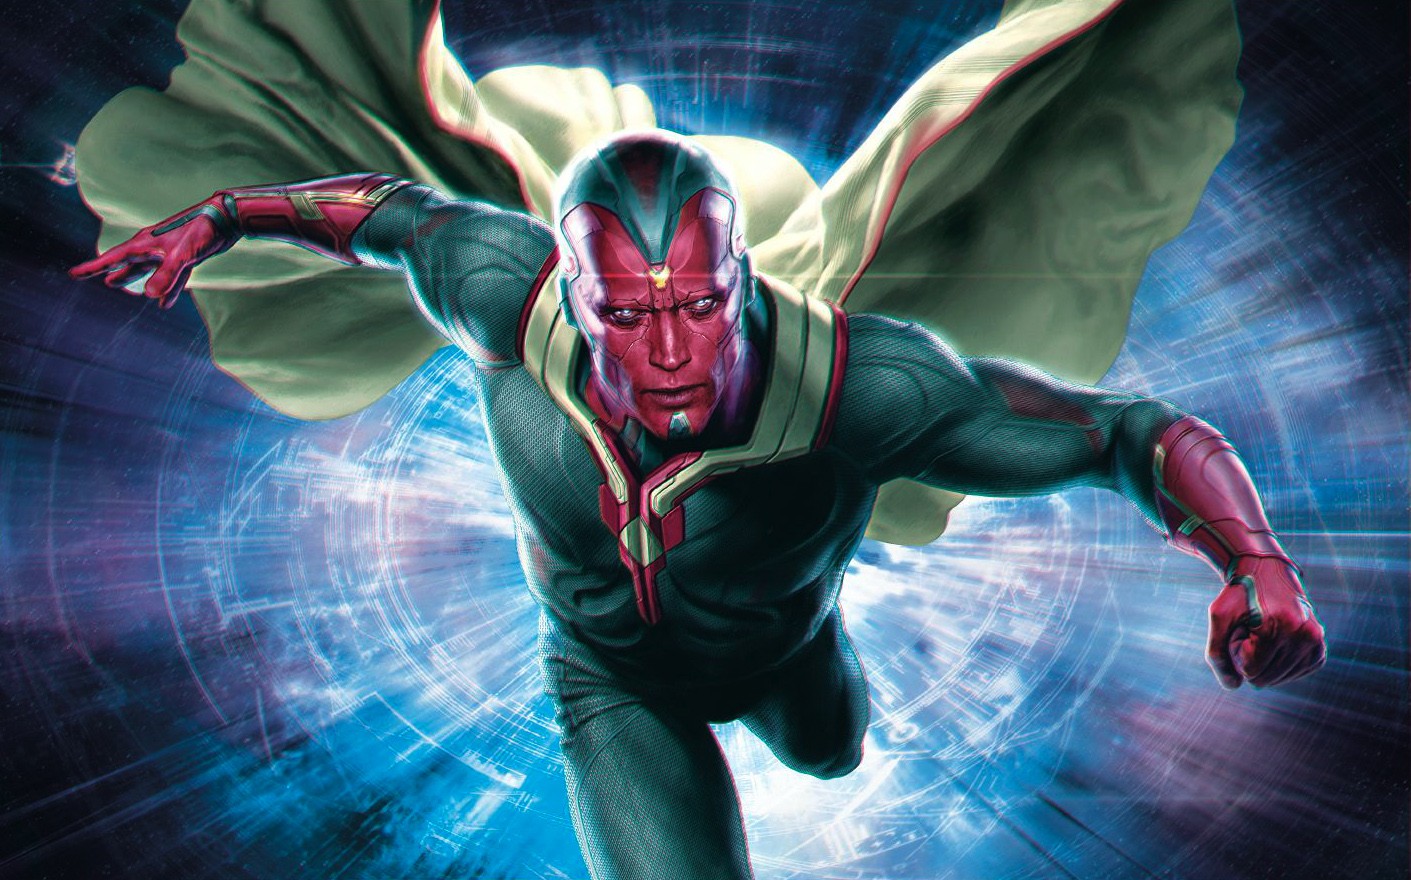 The Vision Marvel Cinematic Universe Avengers Age Of Ultron Paul Bettany 1411x880